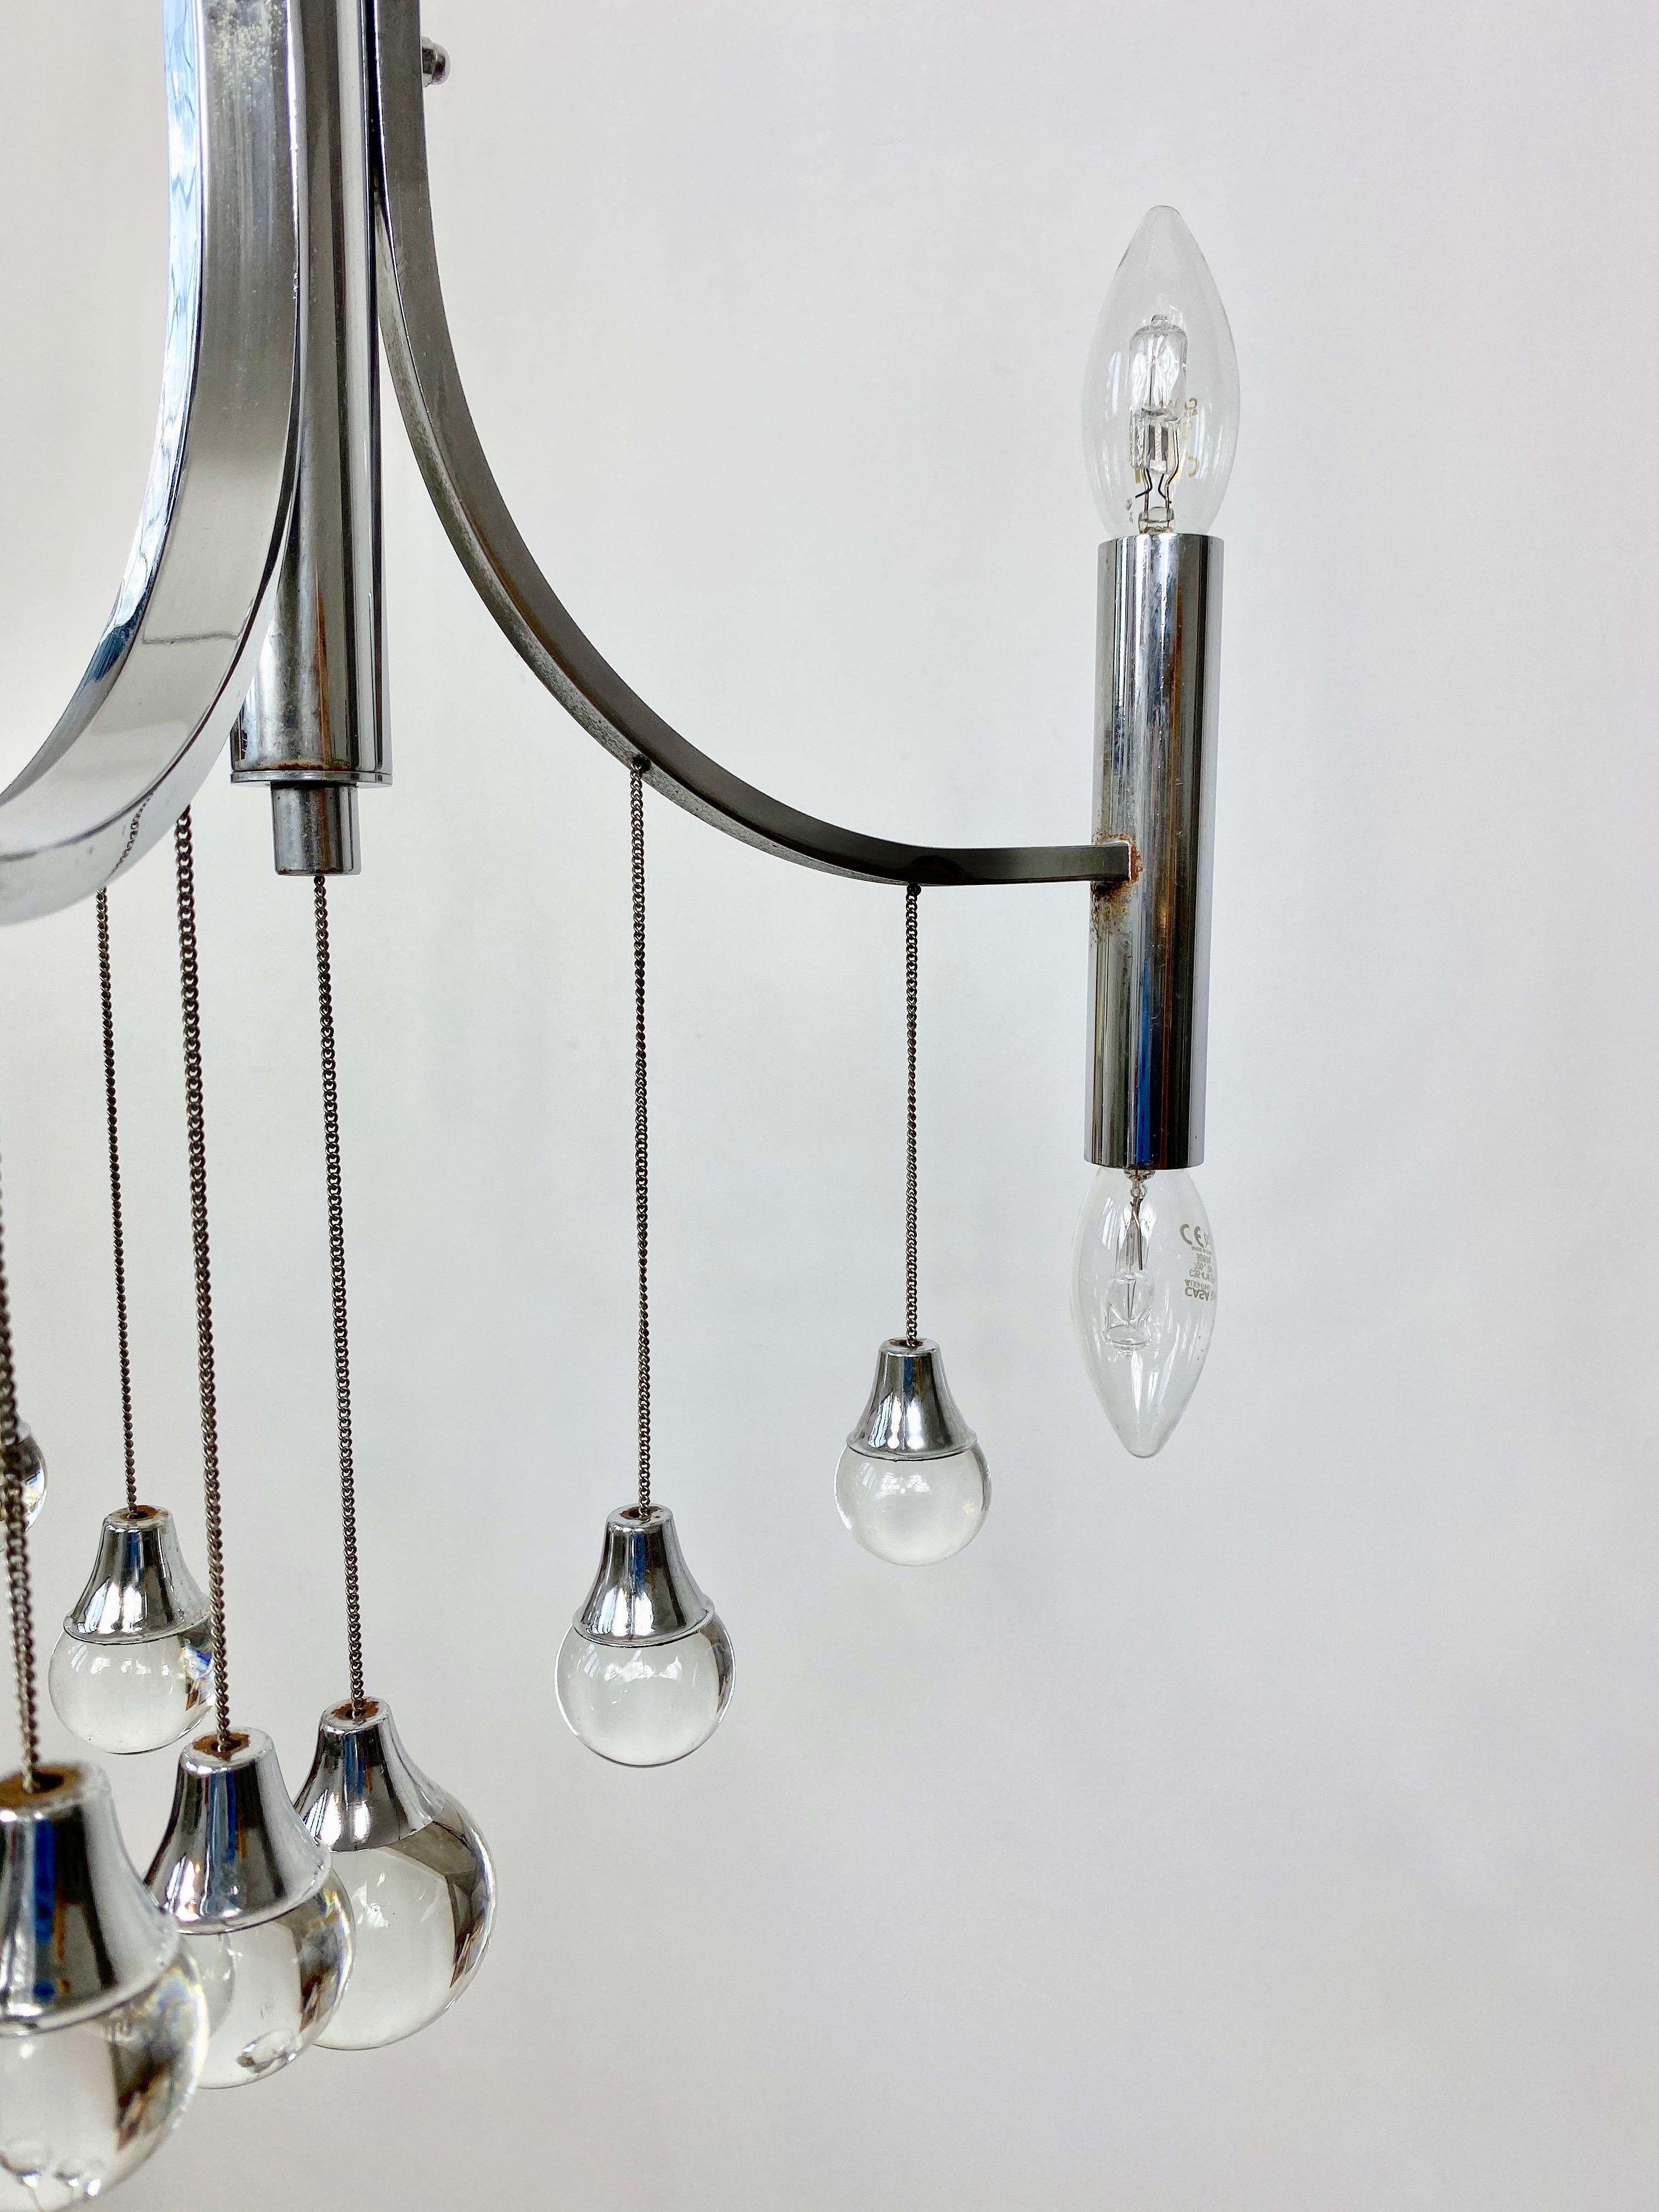 Mid-20th Century Chrome and Glass Chandelier Pendant by Gaetano Sciolari, Italy, 1960s For Sale